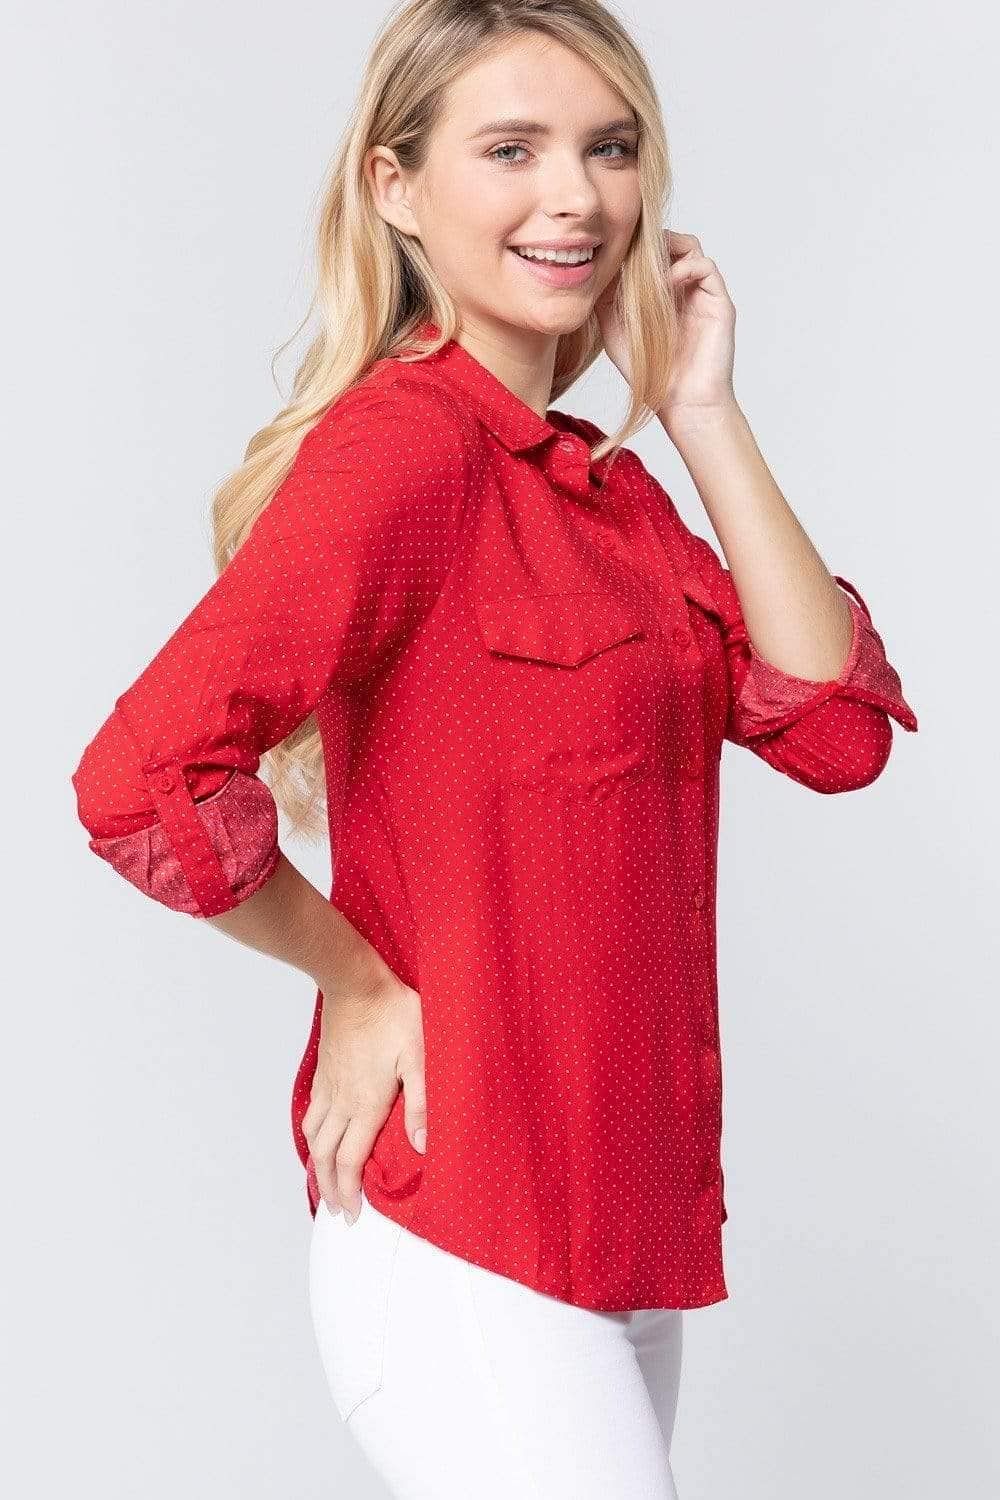 Red Roll Up Sleeve Polka Dot Shirt - Shopping Therapy L Shirt